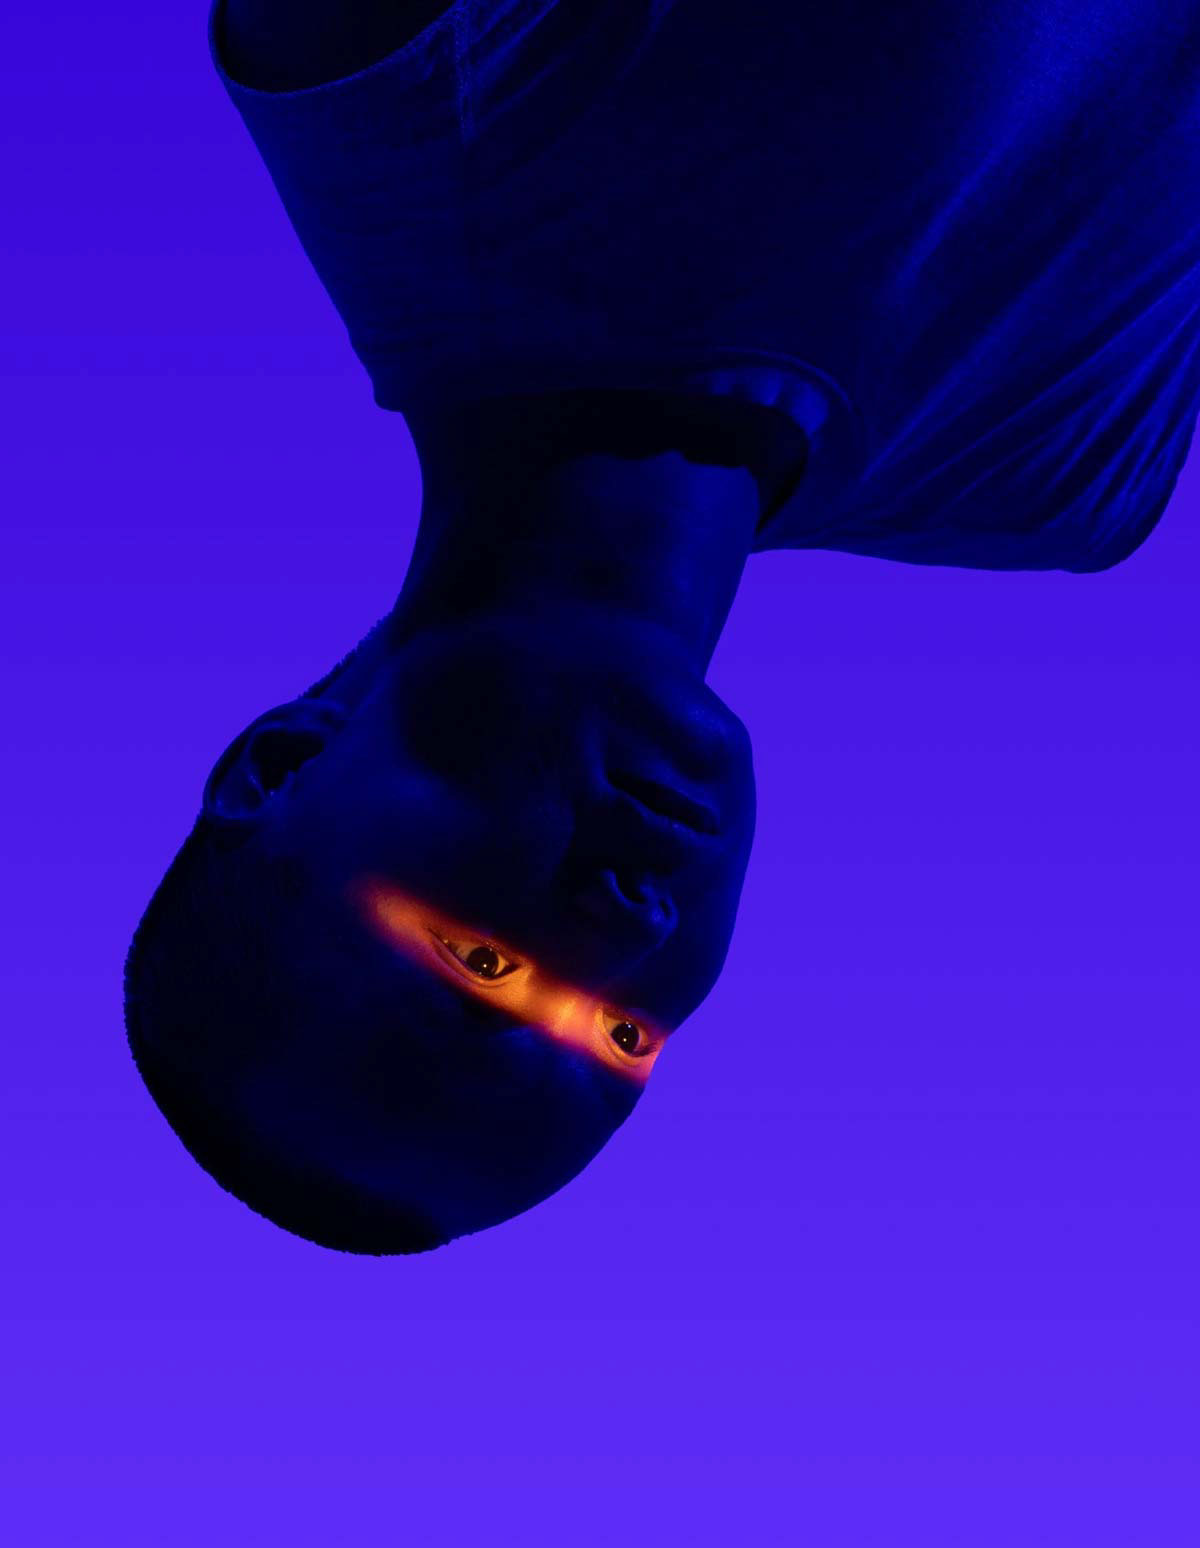 A dance artist is lit in all blue except for a bright light shining across their eyes. The artist appears to be hanging upside down.